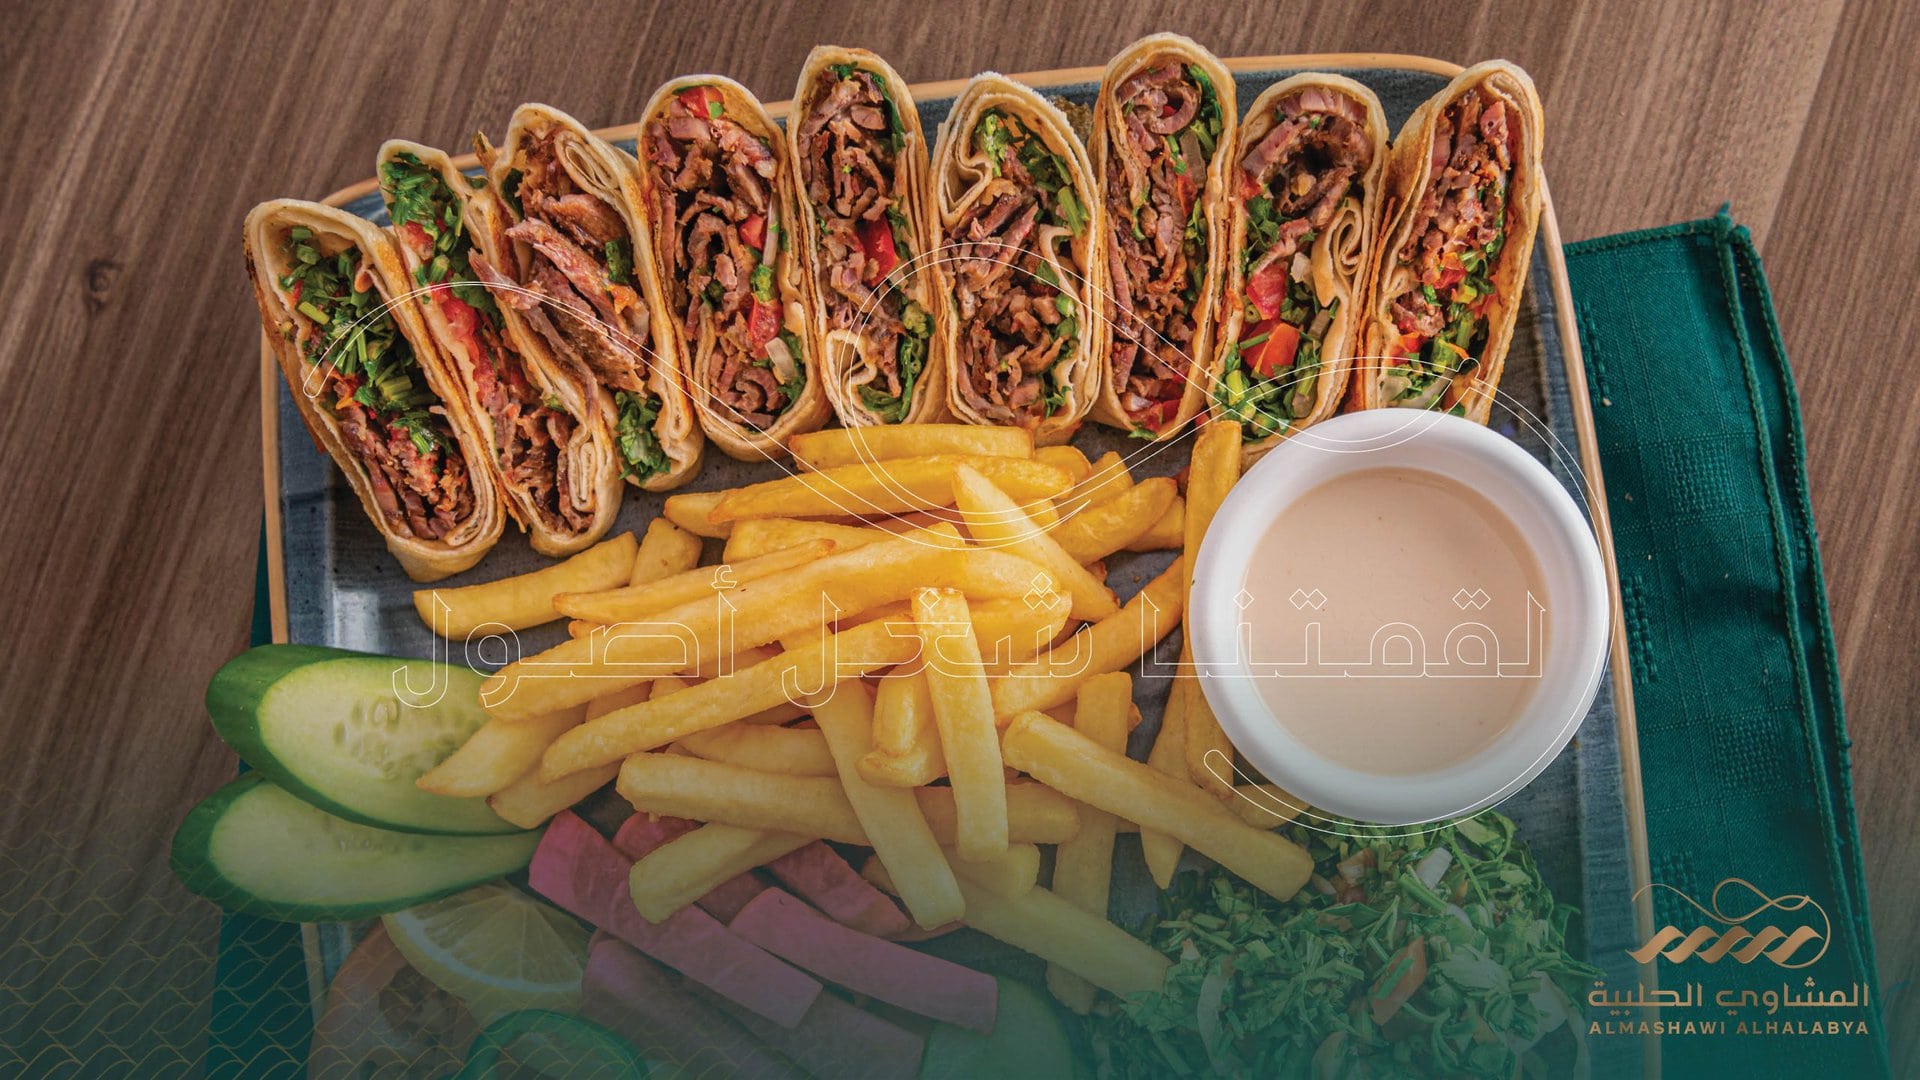 Satisfy Your Cravings with Our Delicious Chicken Shawarma in Dubai